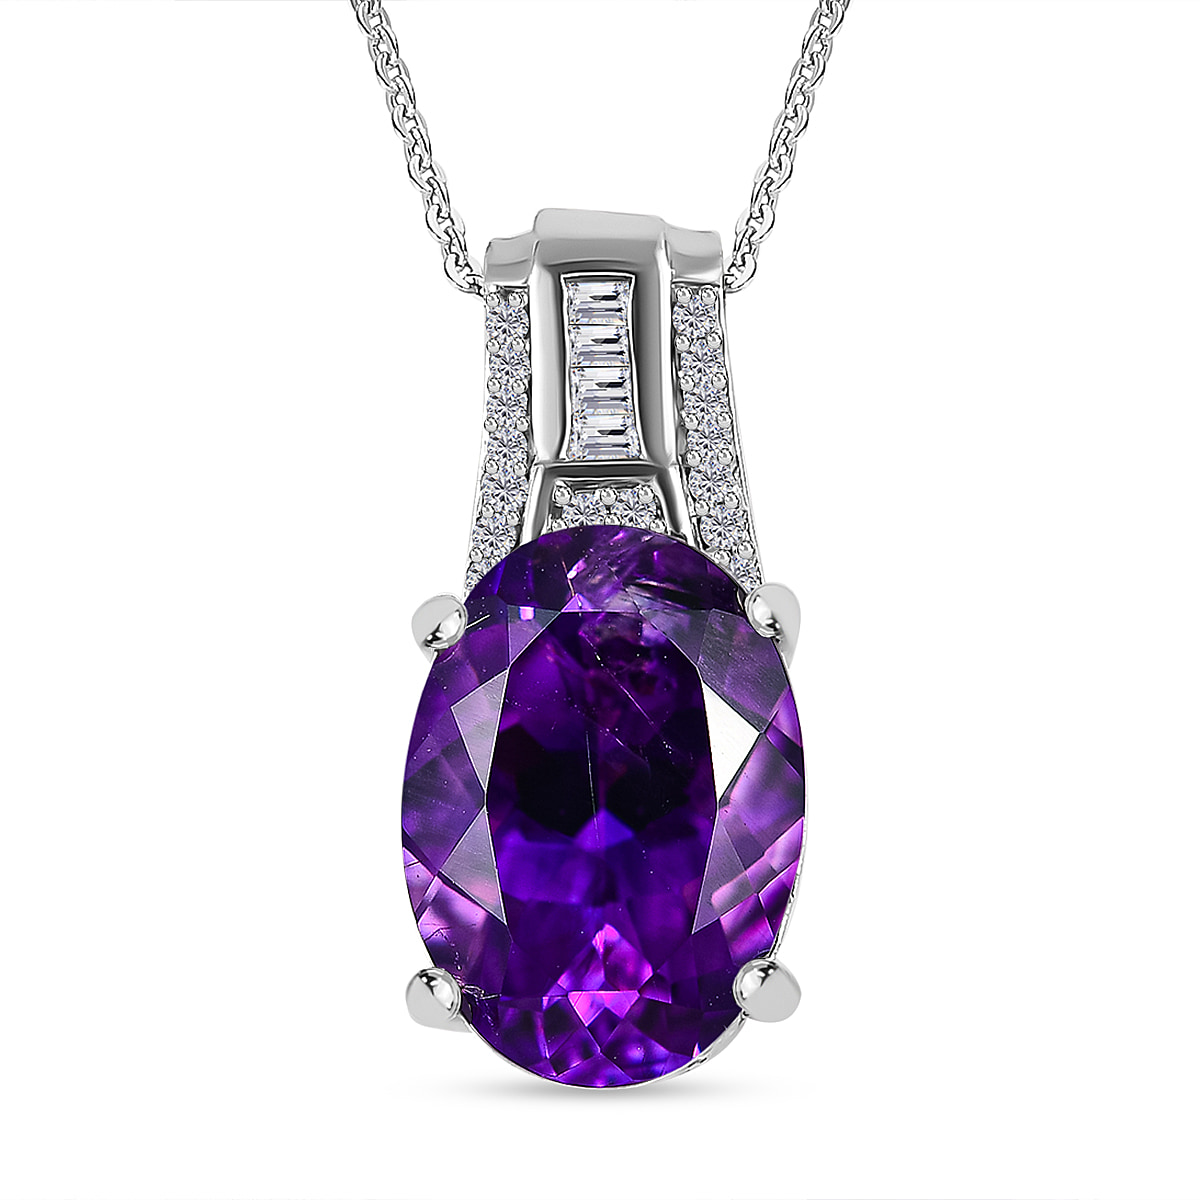 Moroccan Amethyst & Natural Zircon Pendant with Chain (Size 20) in Platinum Overlay Sterling Silver 6.10 Ct.